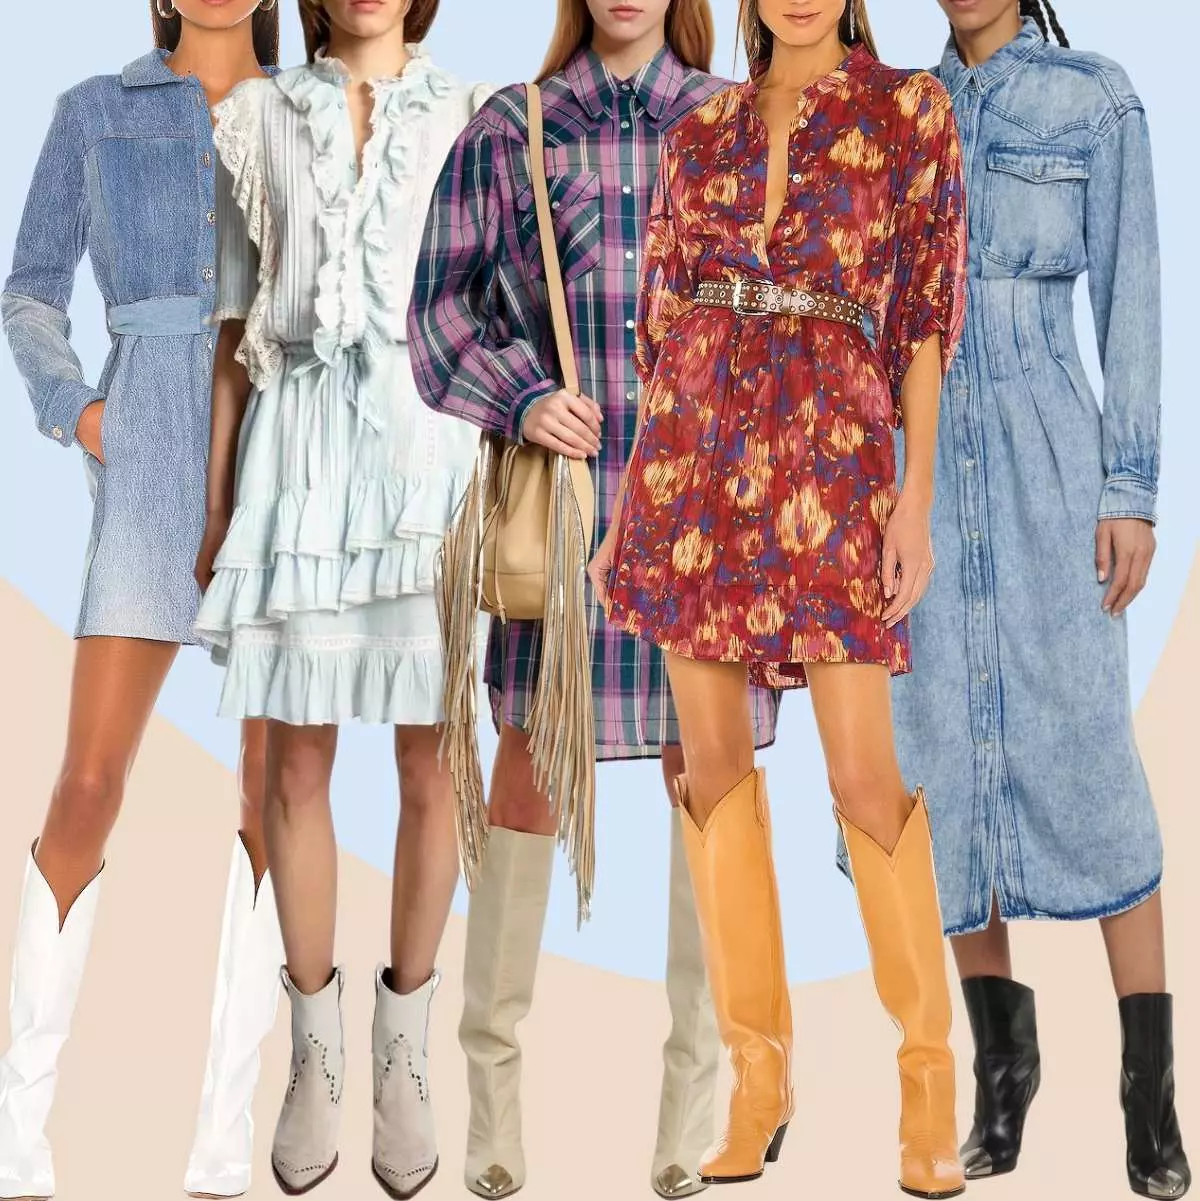 Collage of 5 women wearing different  <a href='https://shopmrkatin.vn/jeremiah-craig-a3076.html' title='cowboy boots' class='hover-show-link replace-link-42'>cowboy boots<span class='hover-show-content'></span></a>  with a shirt dress.